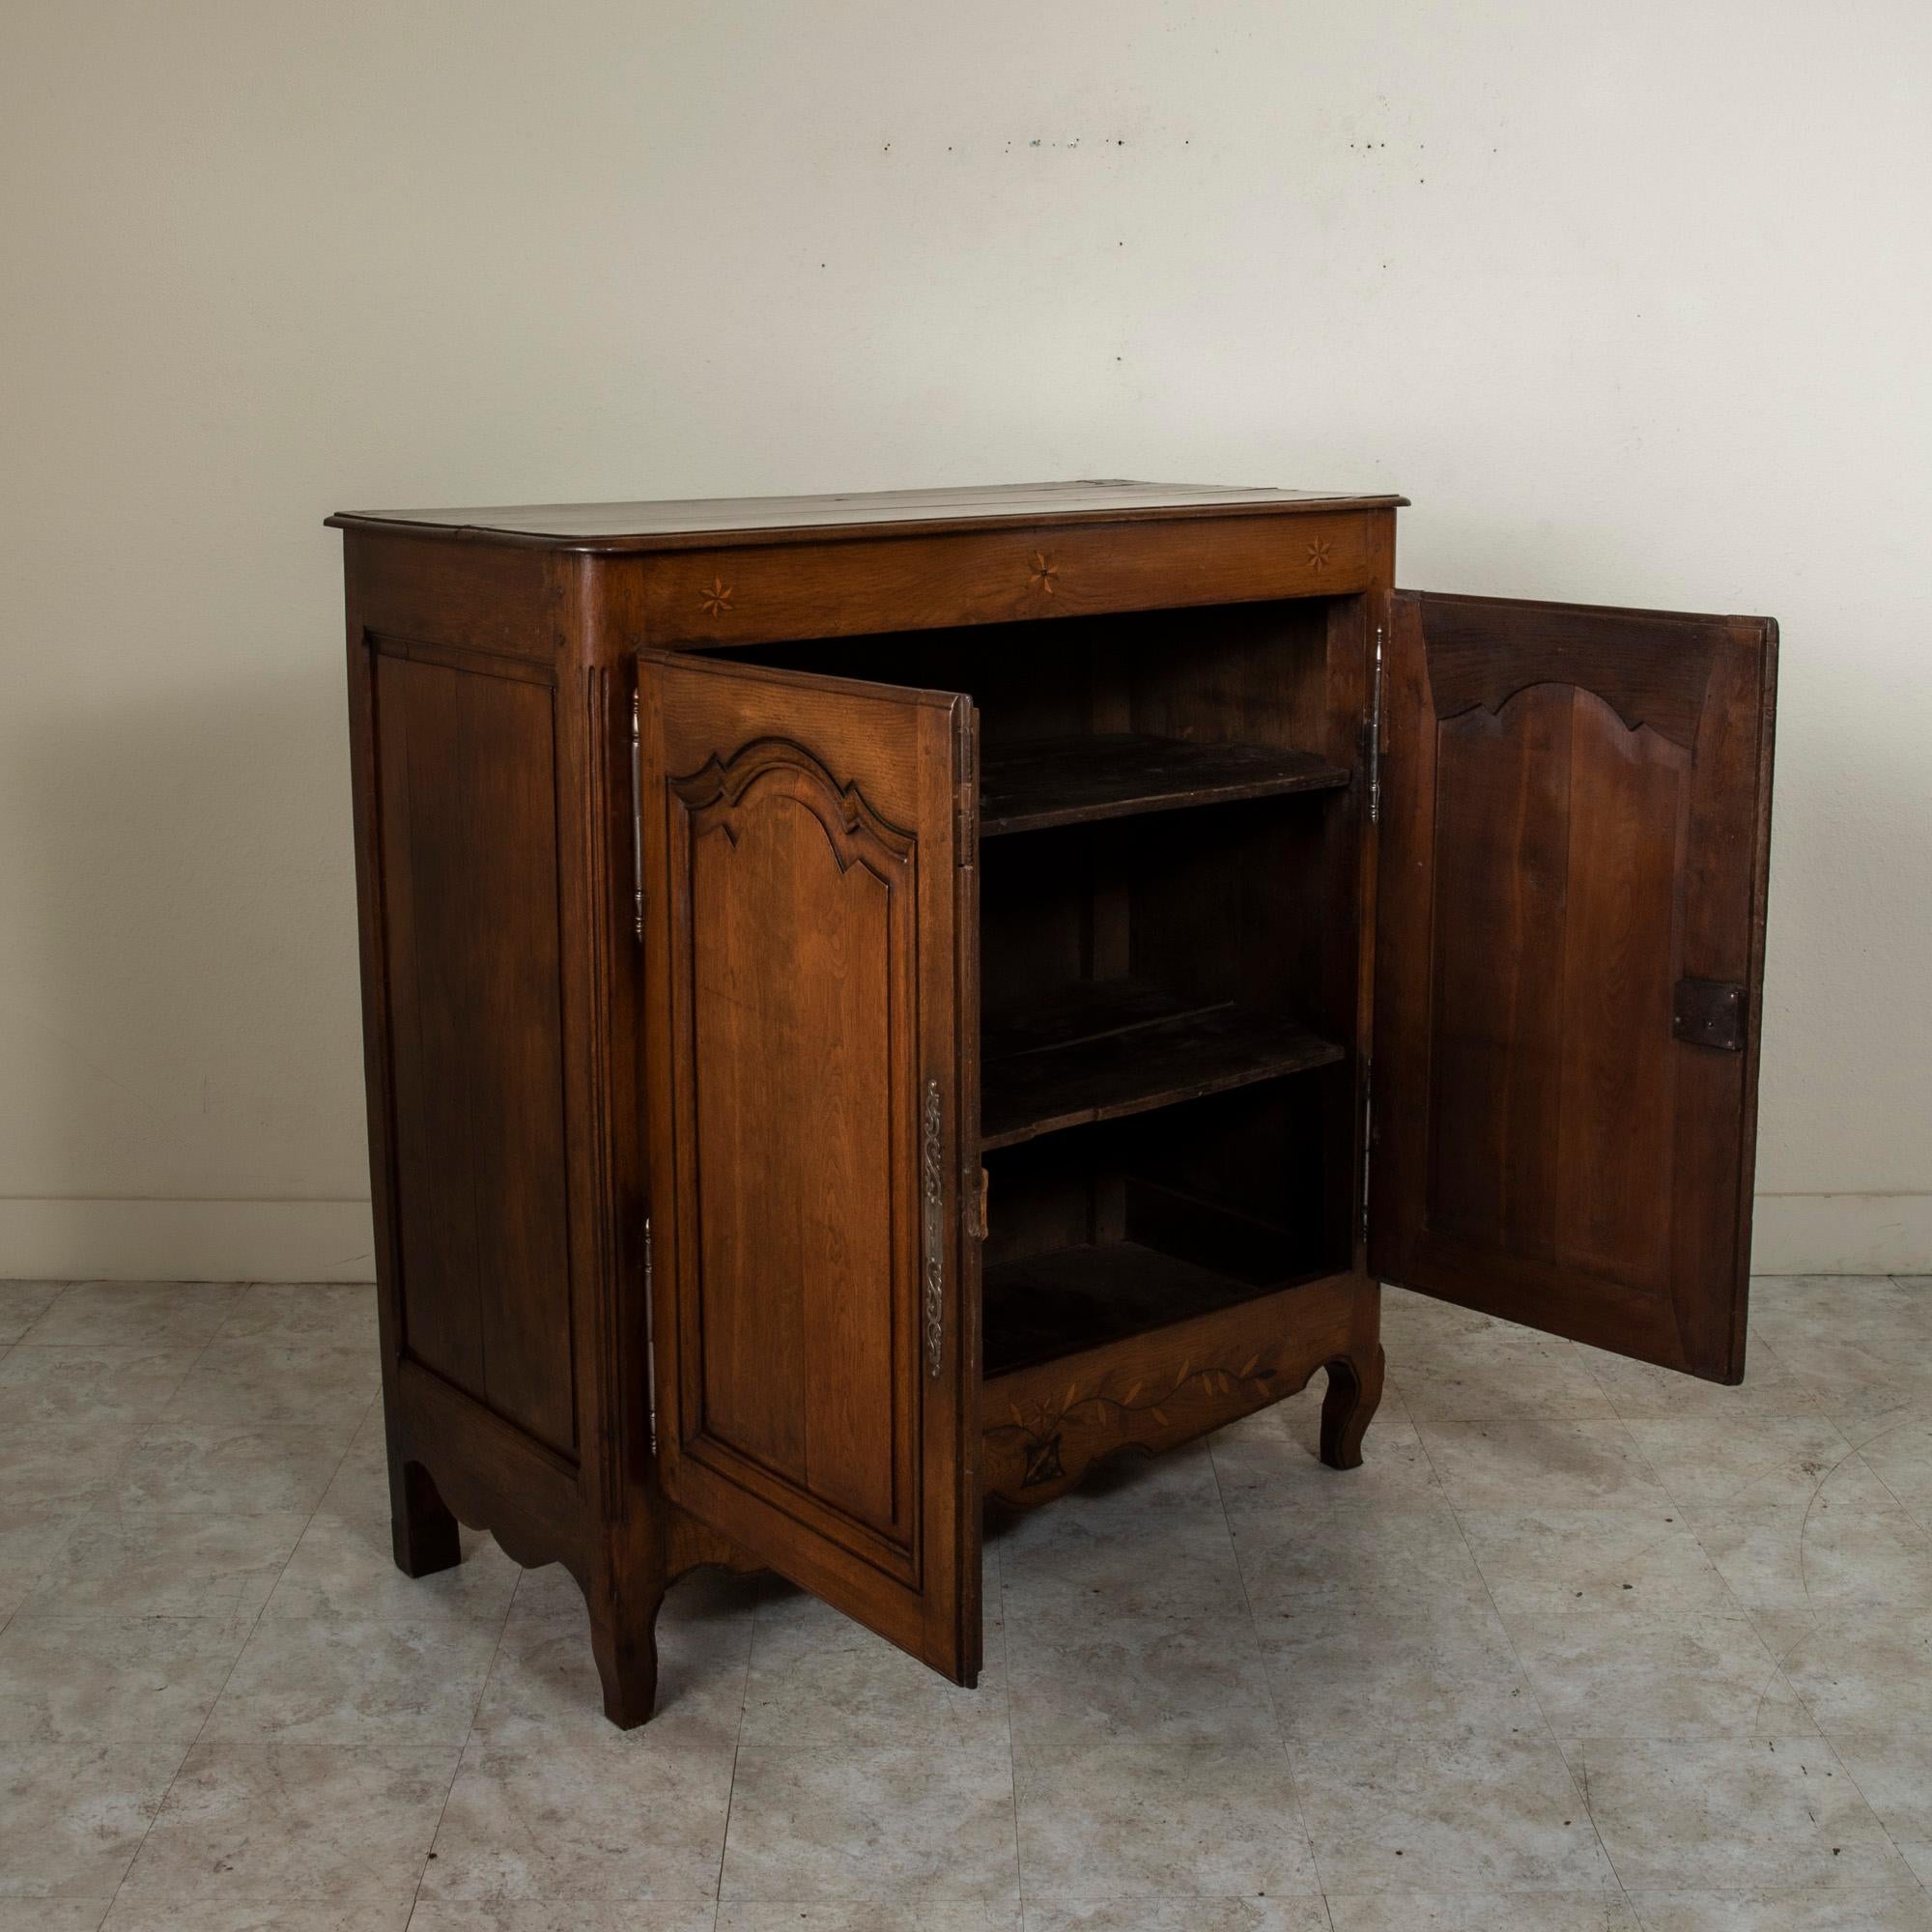 Inlay Early 19th Century French Oak Bassette, Small Armoire, Buffet D'appui For Sale